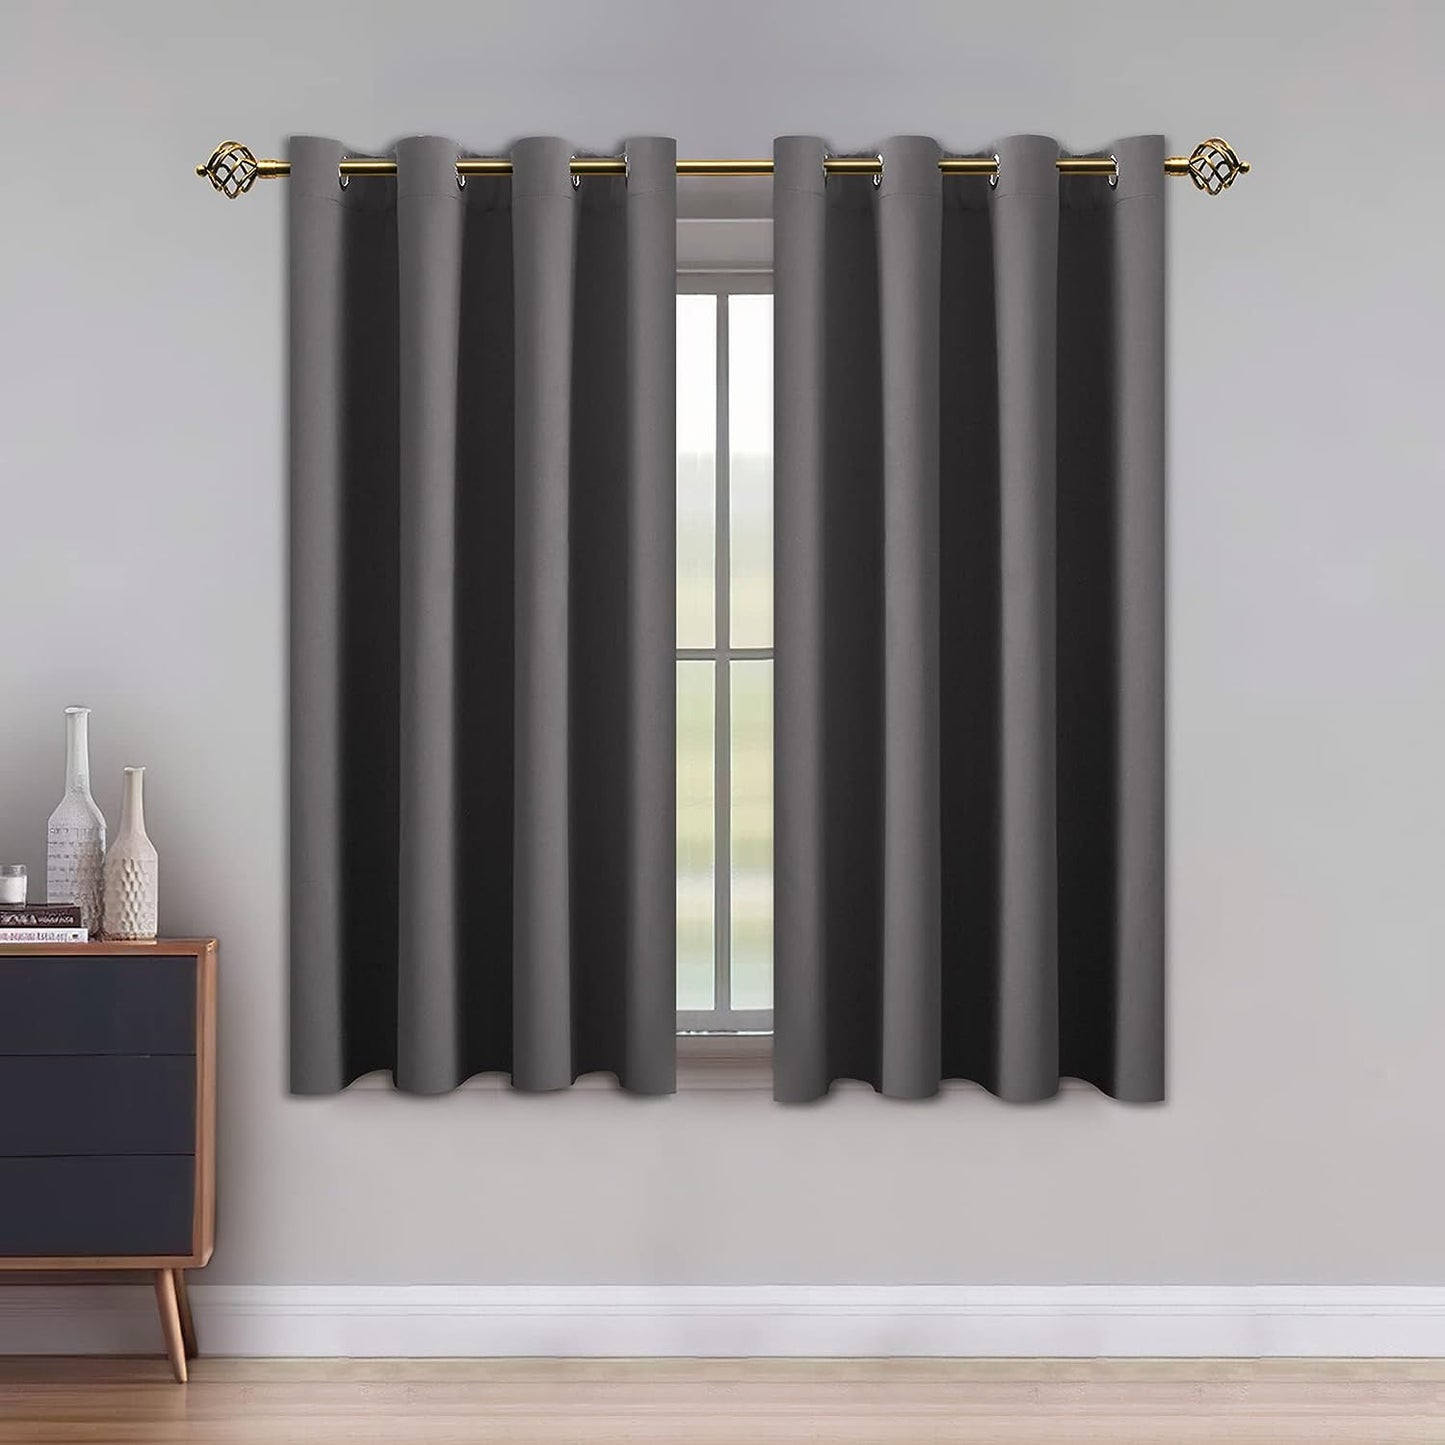 LUSHLEAF Blackout Curtains for Bedroom, Solid Thermal Insulated with Grommet Noise Reduction Window Drapes, Room Darkening Curtains for Living Room, 2 Panels, 52 X 63 Inch Grey  SHEEROOM Grey 52 X 54 Inch 